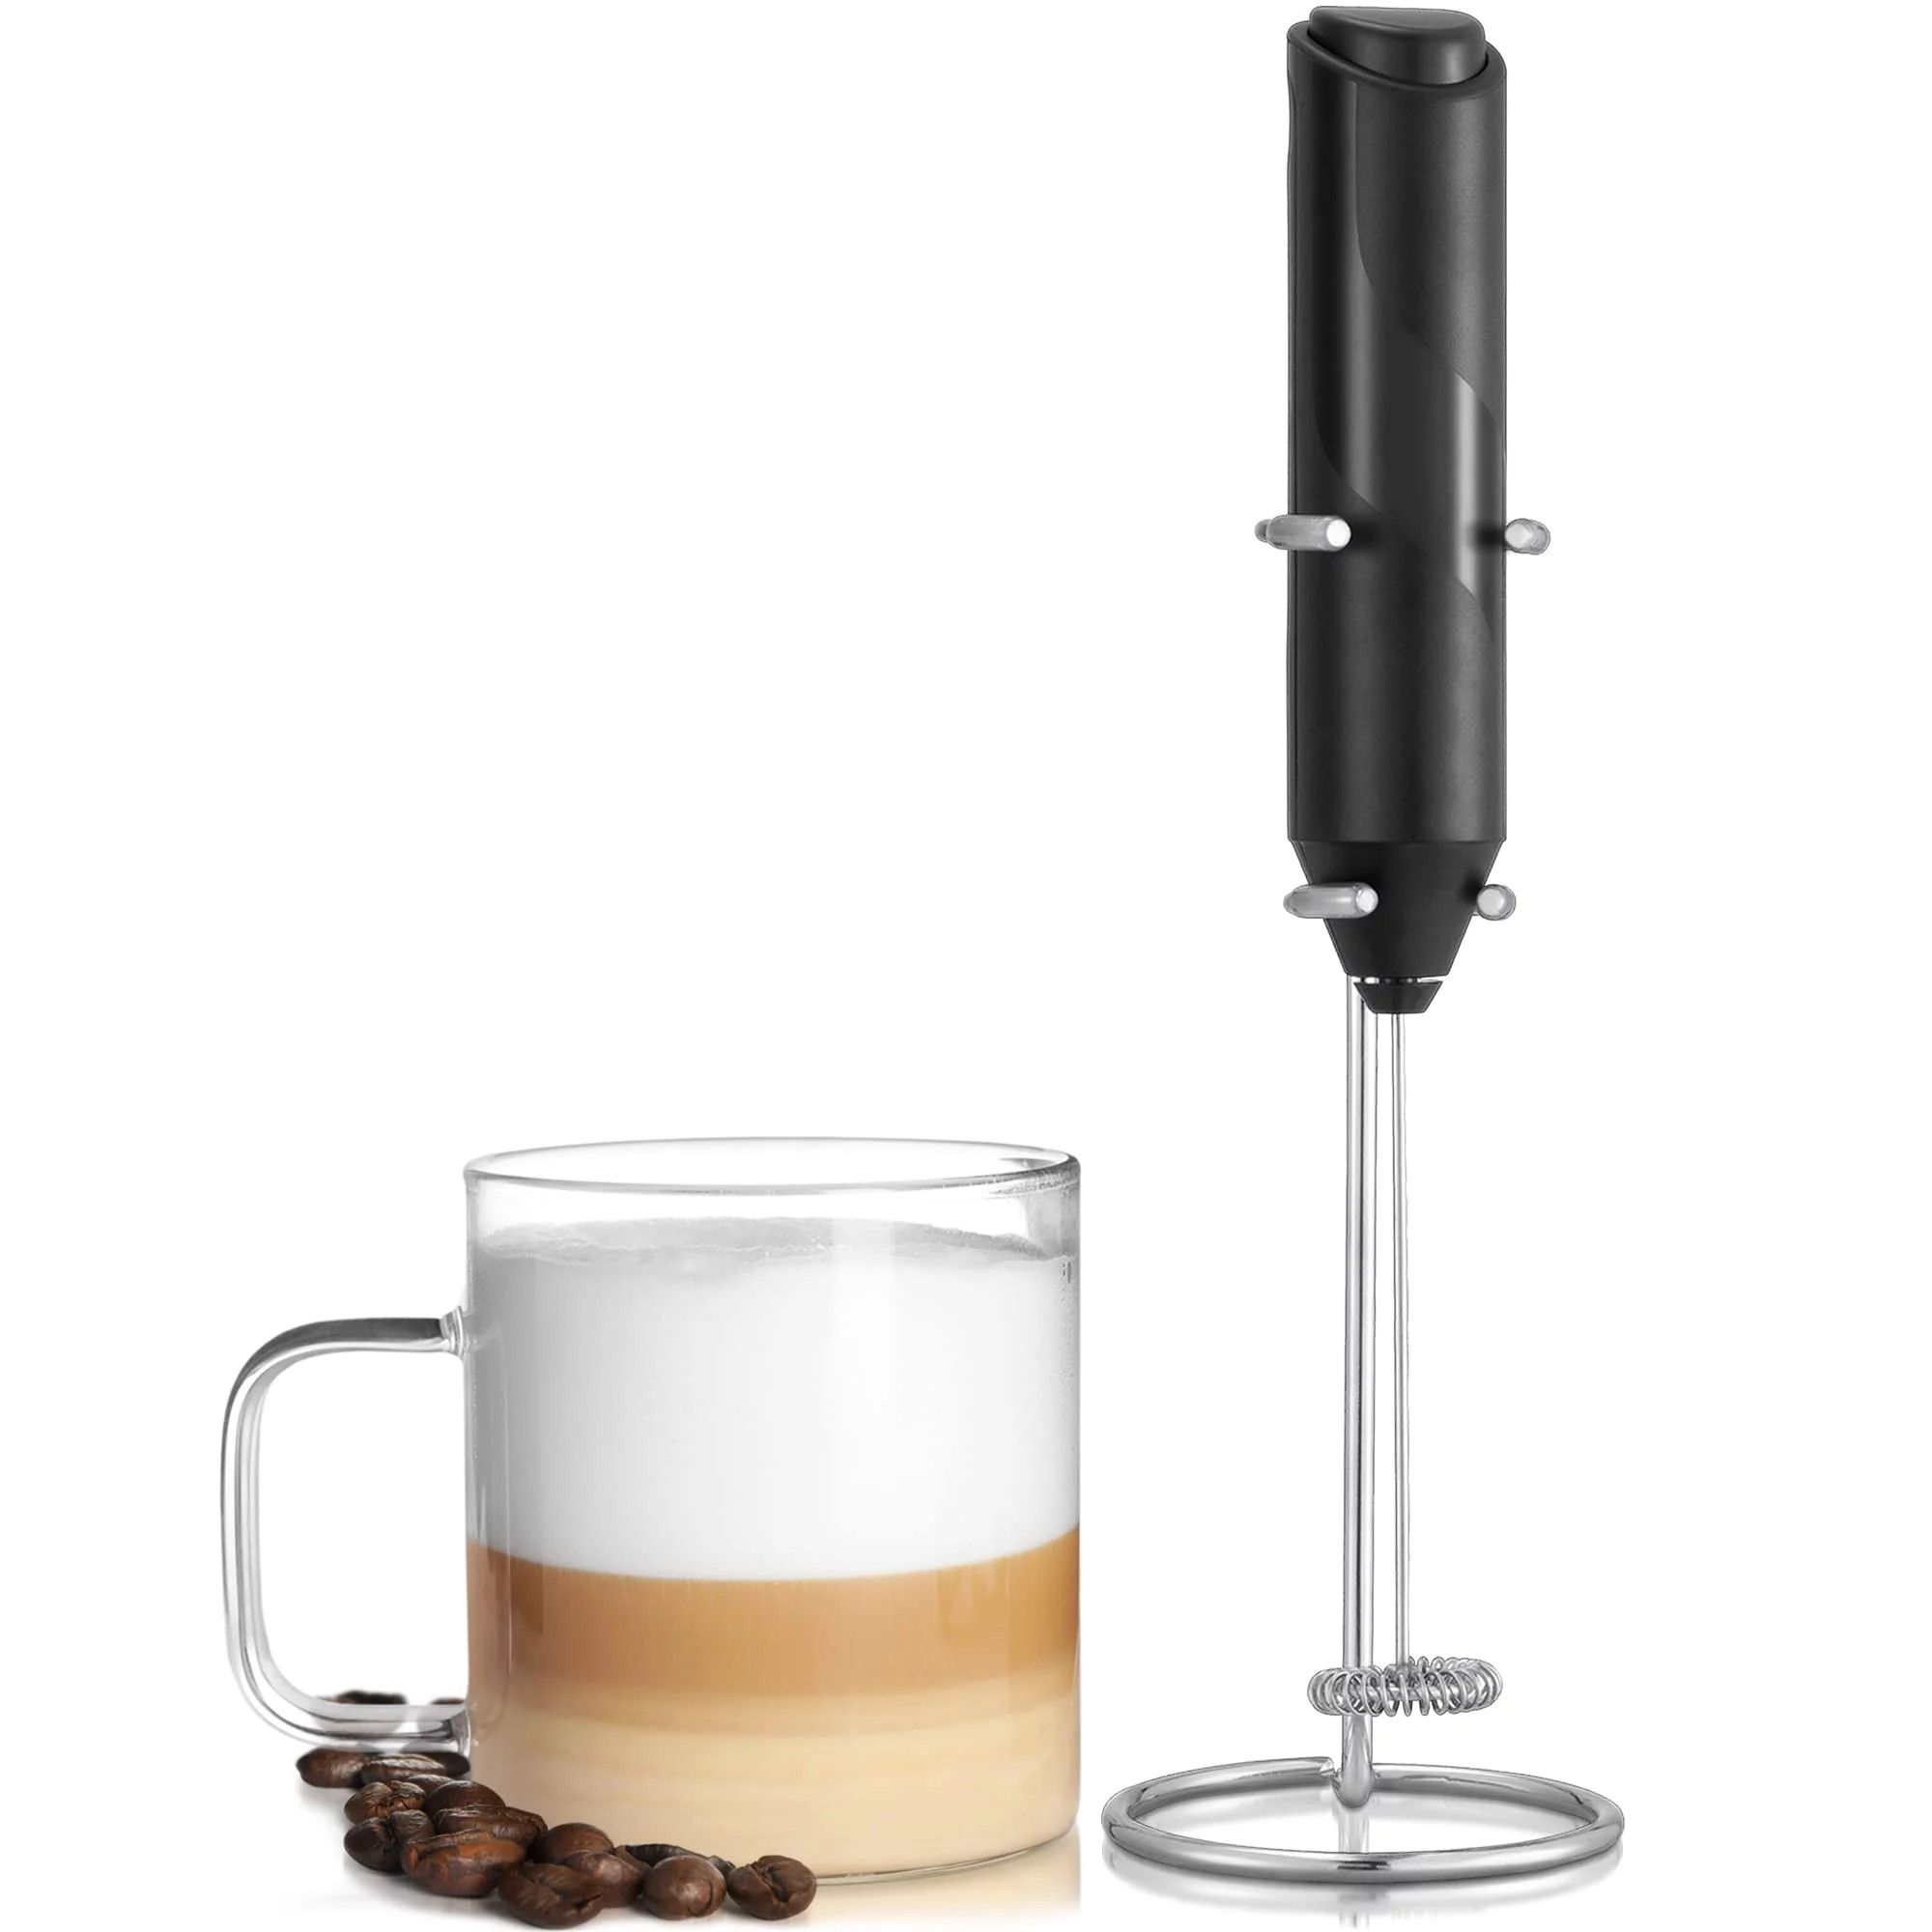 Milk Frother for Coffee, Handheld Drink Mixer Electric Whisk, Black, by Mata1-USA | Walmart (US)